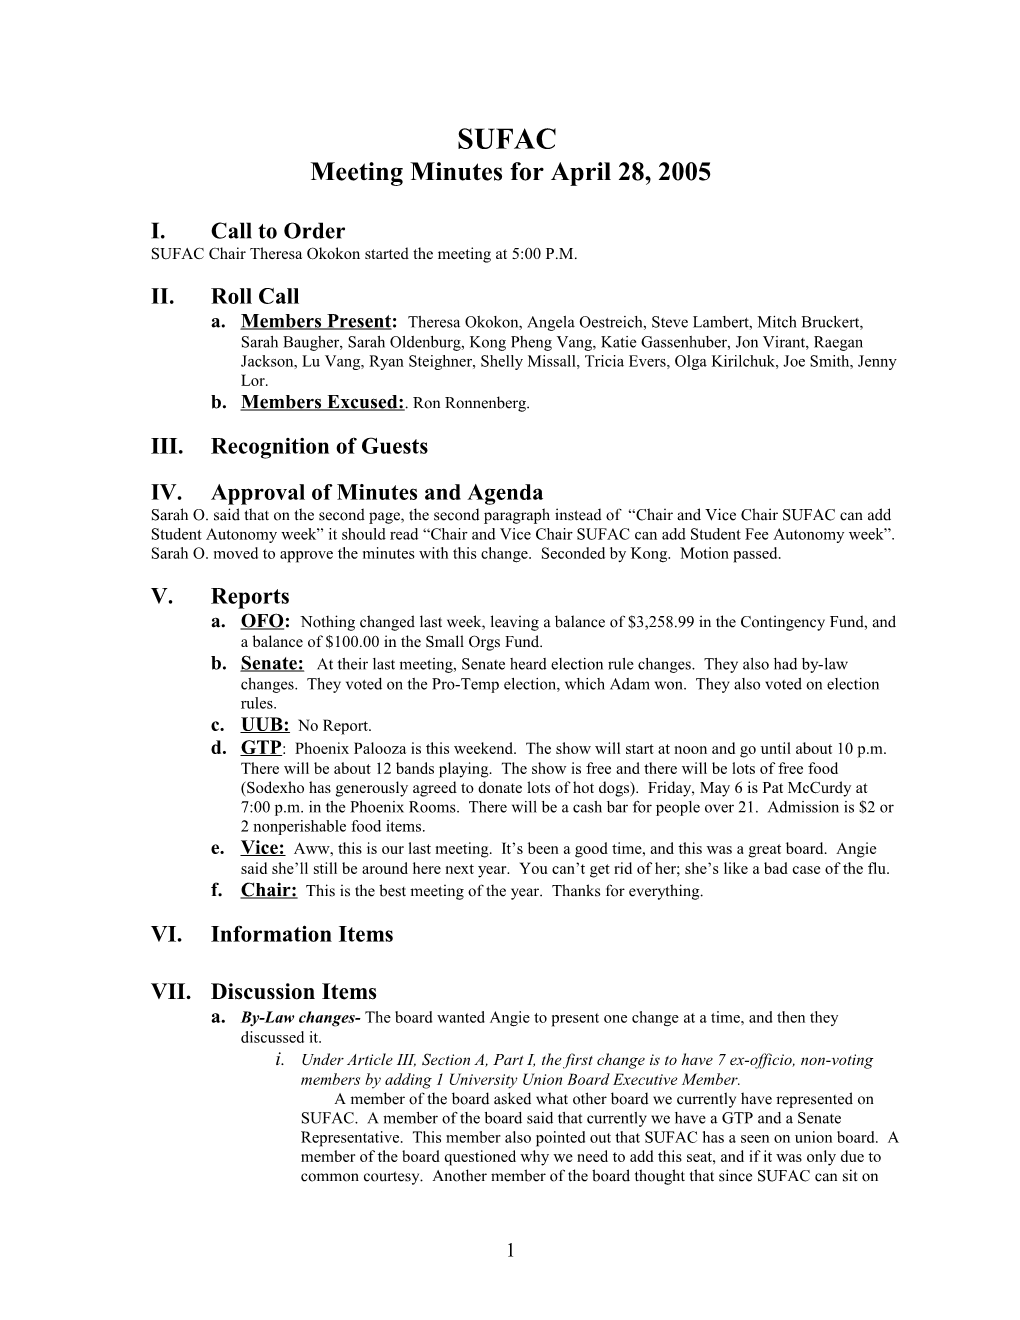 Meeting Minutes for April 28, 2005